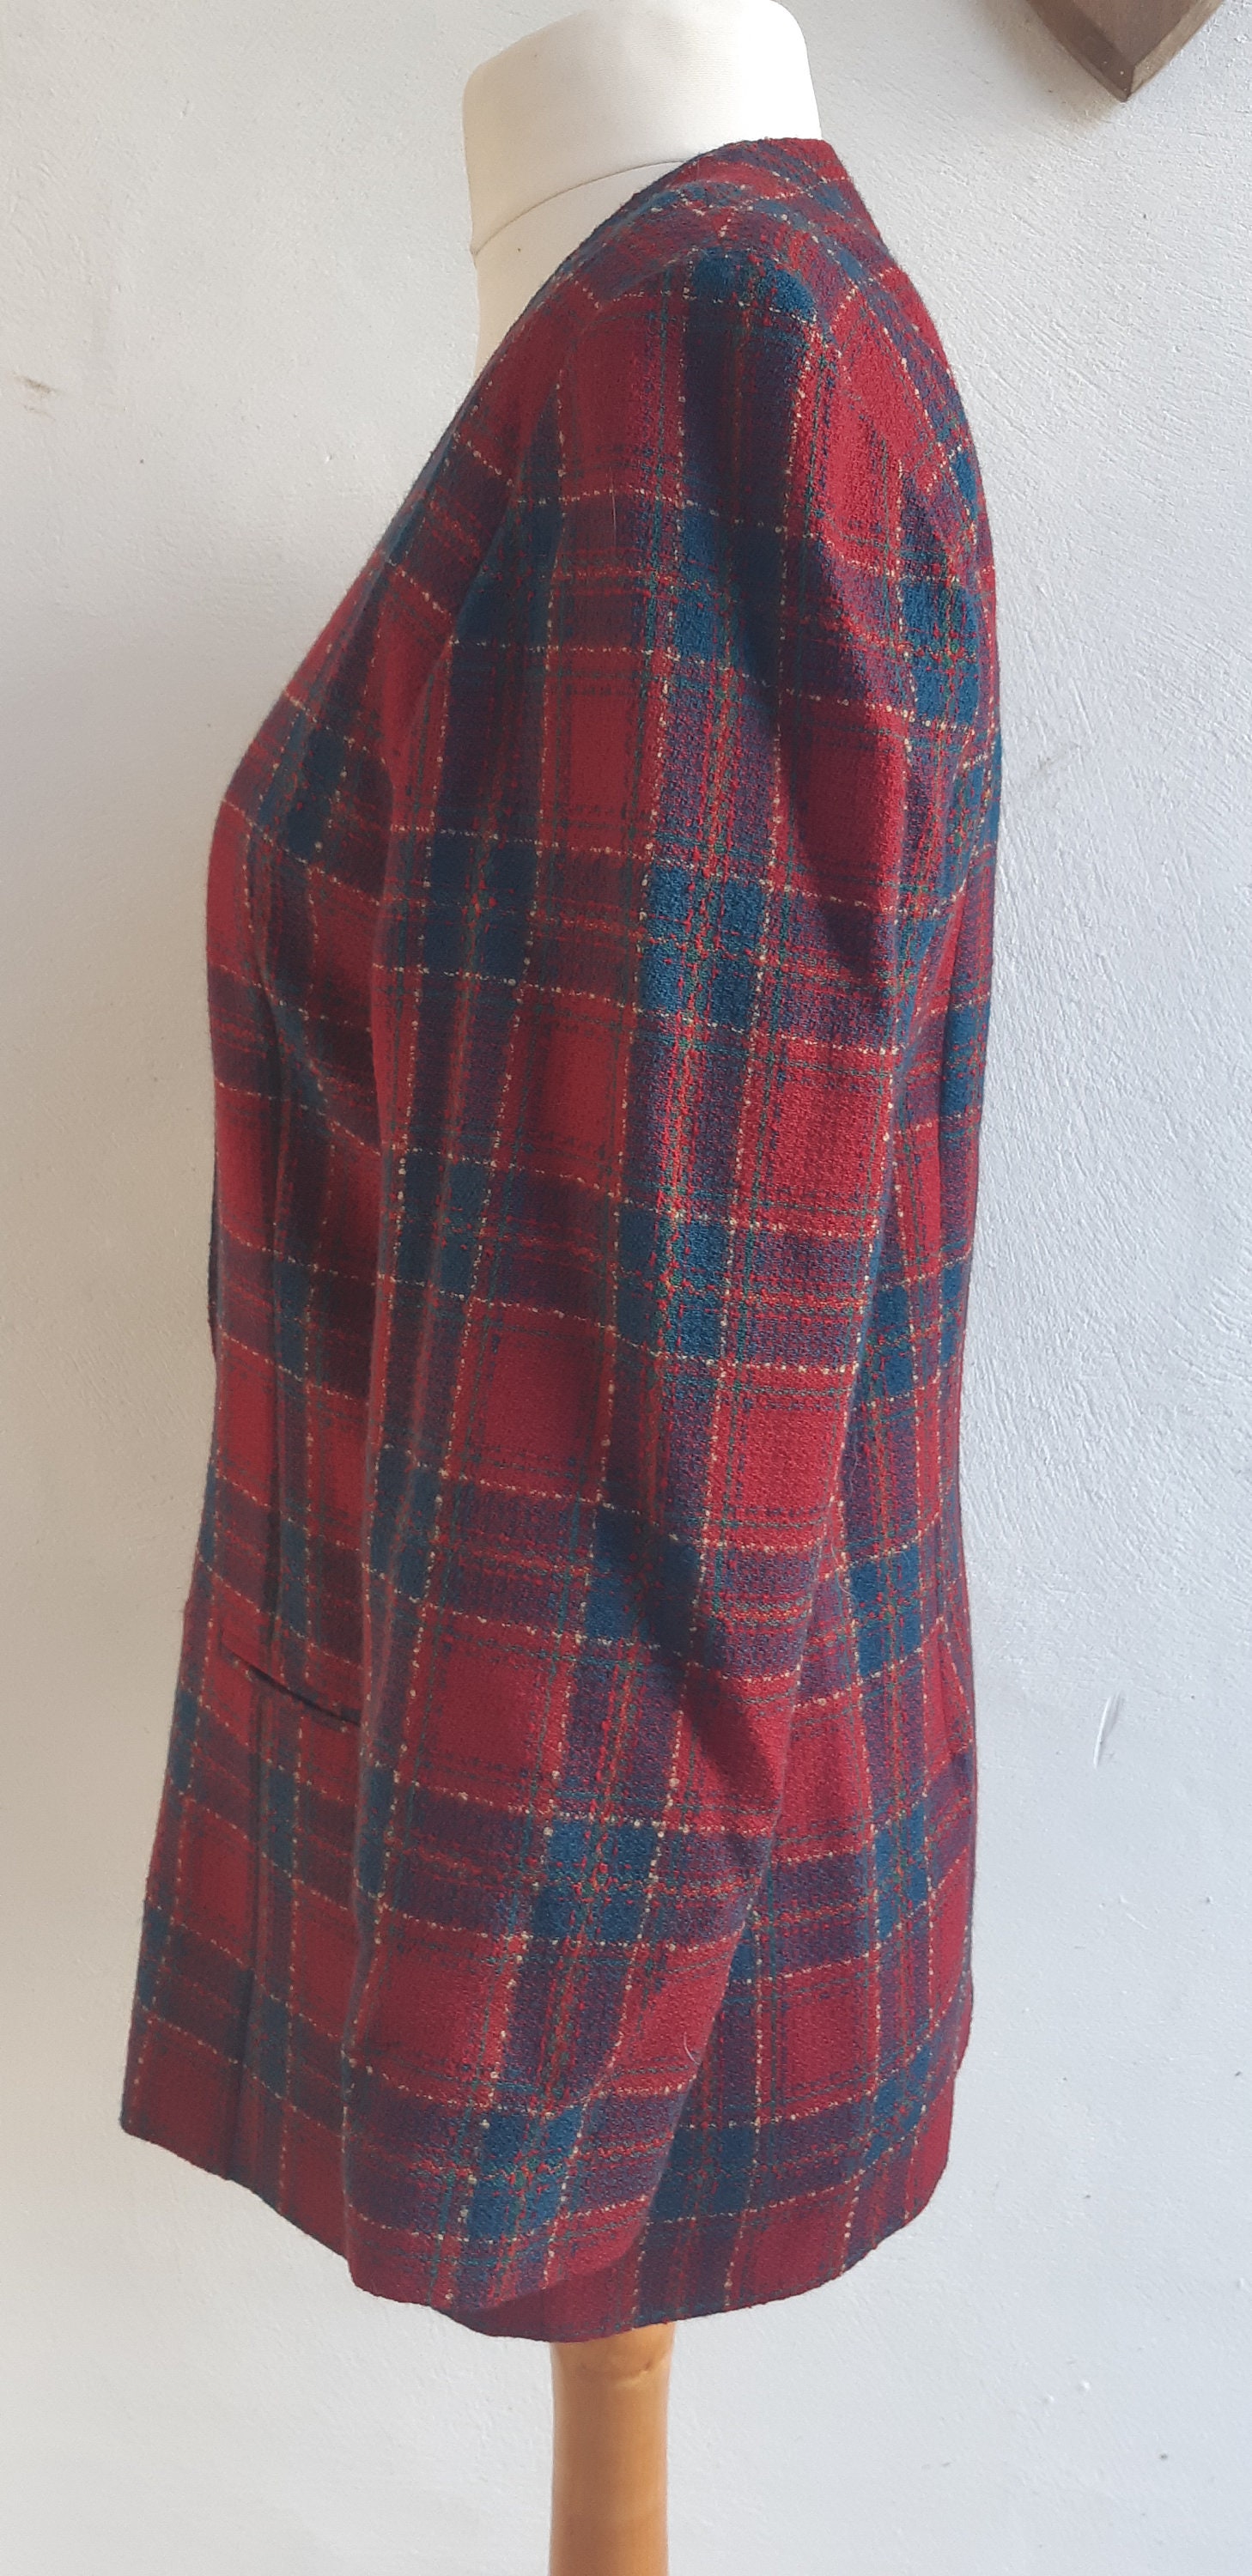 Vintage Tartan Plaid Jacket by Clover Red Blue Green Wool Mix - Etsy UK